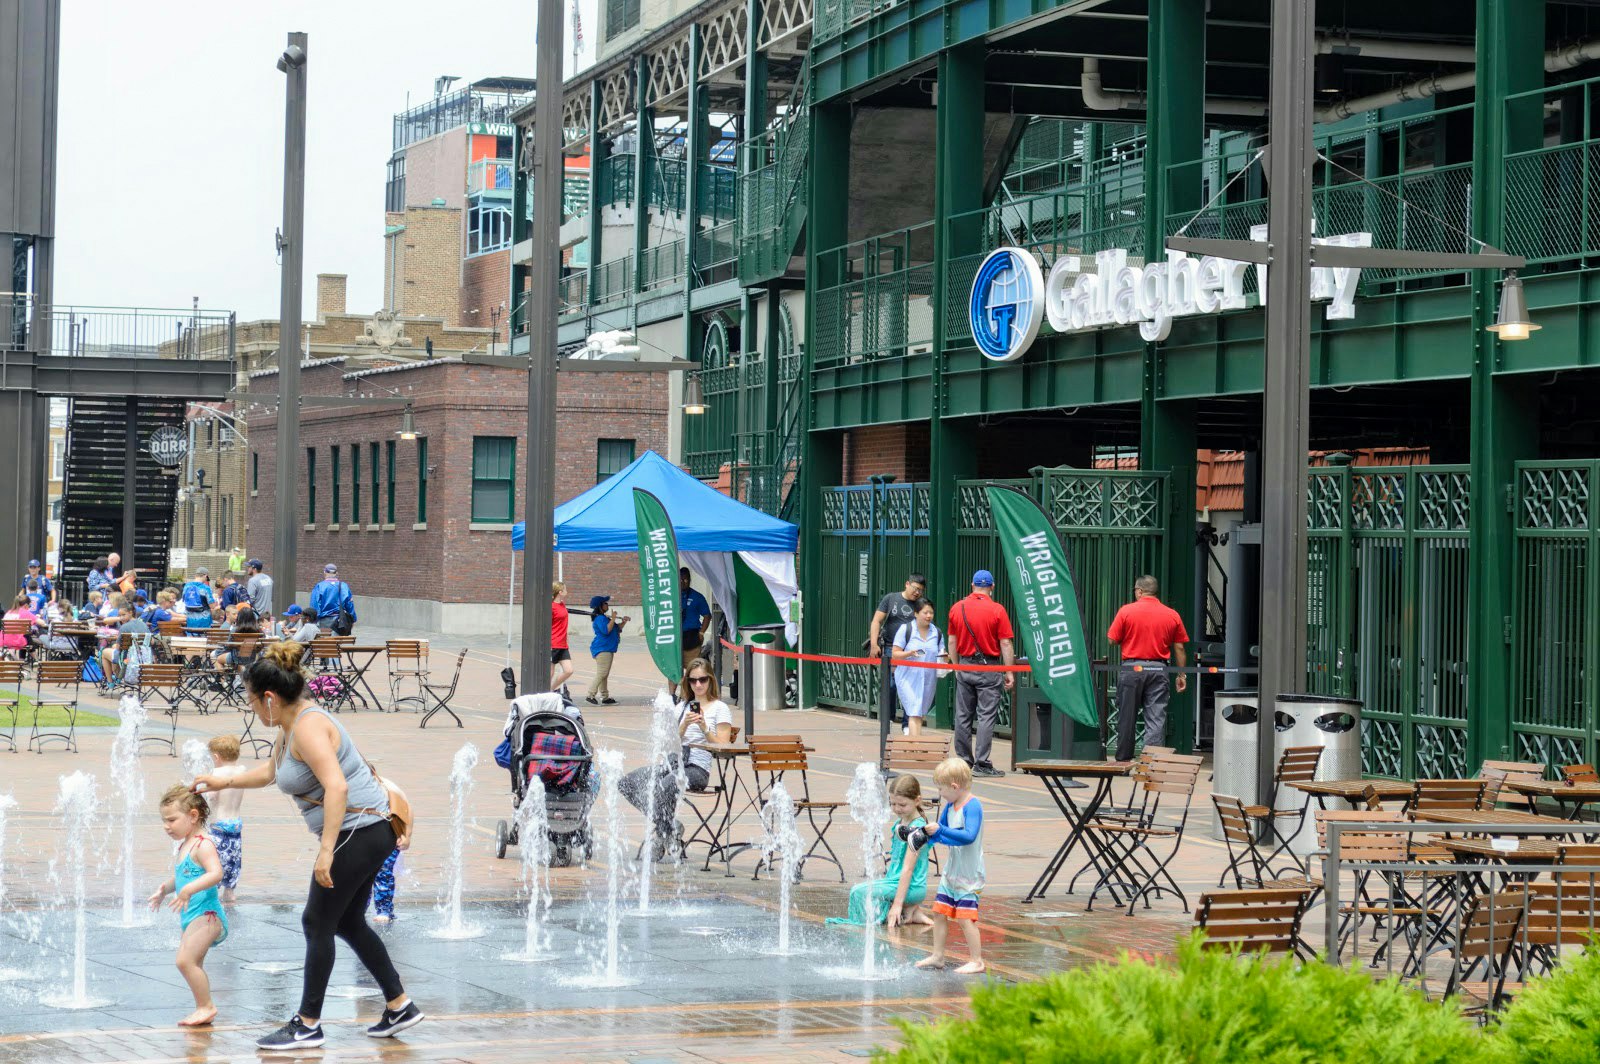 a woman and child play in outdoor fountains near Wrigley Field in Chicago